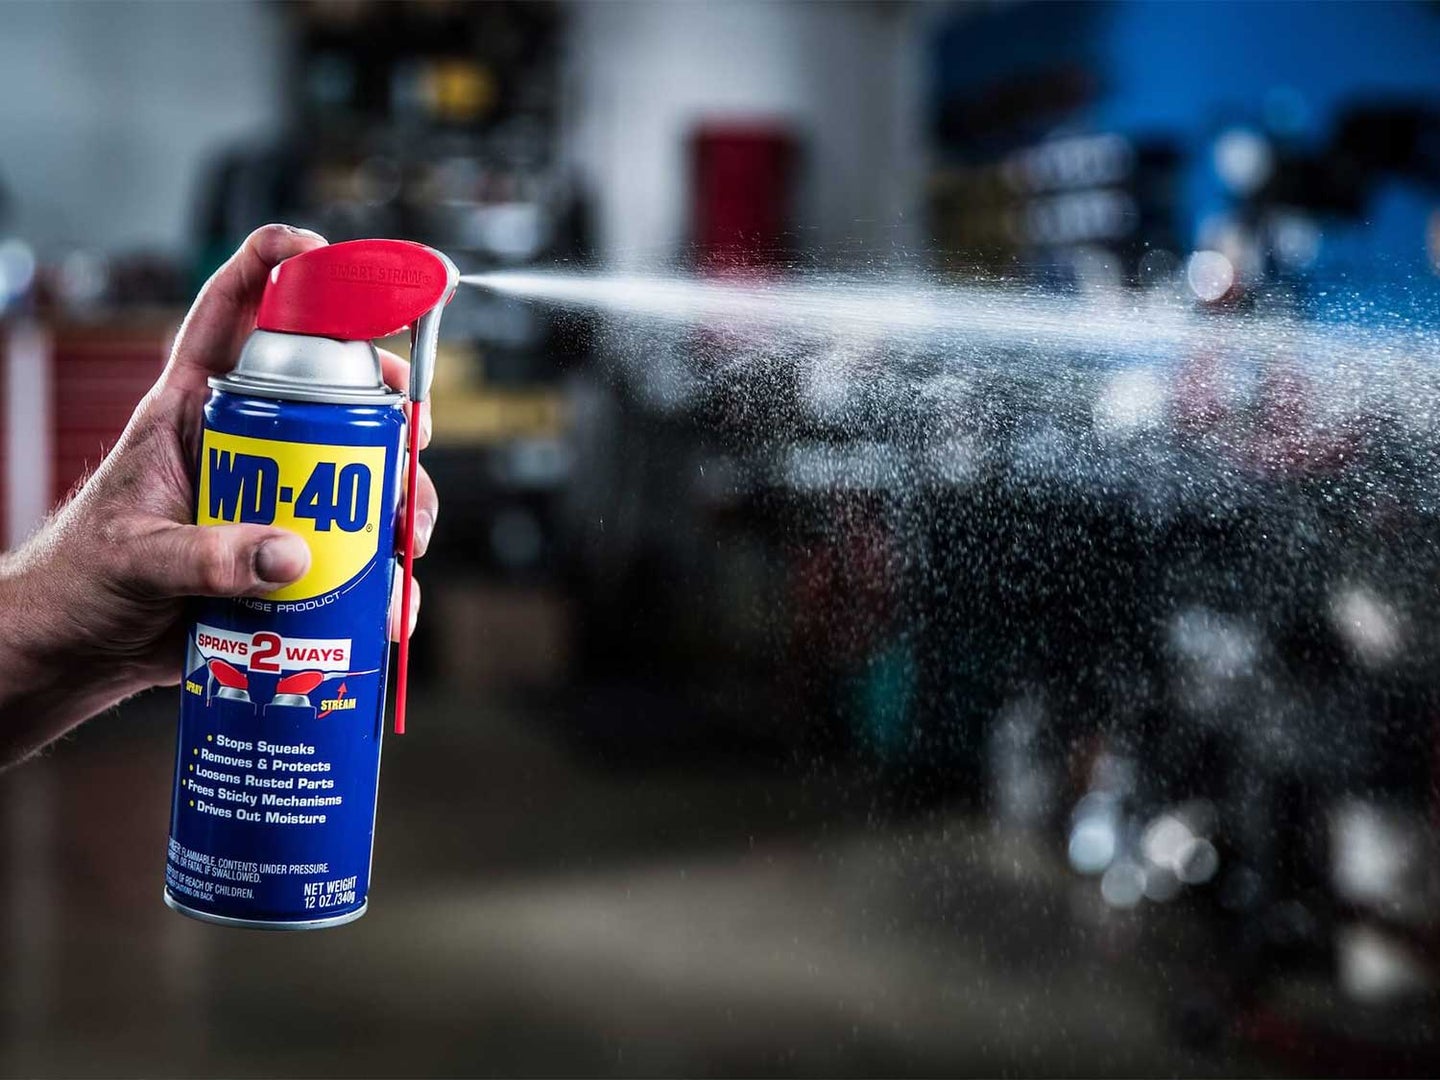 A person spraying a can of WD40 in a garage.